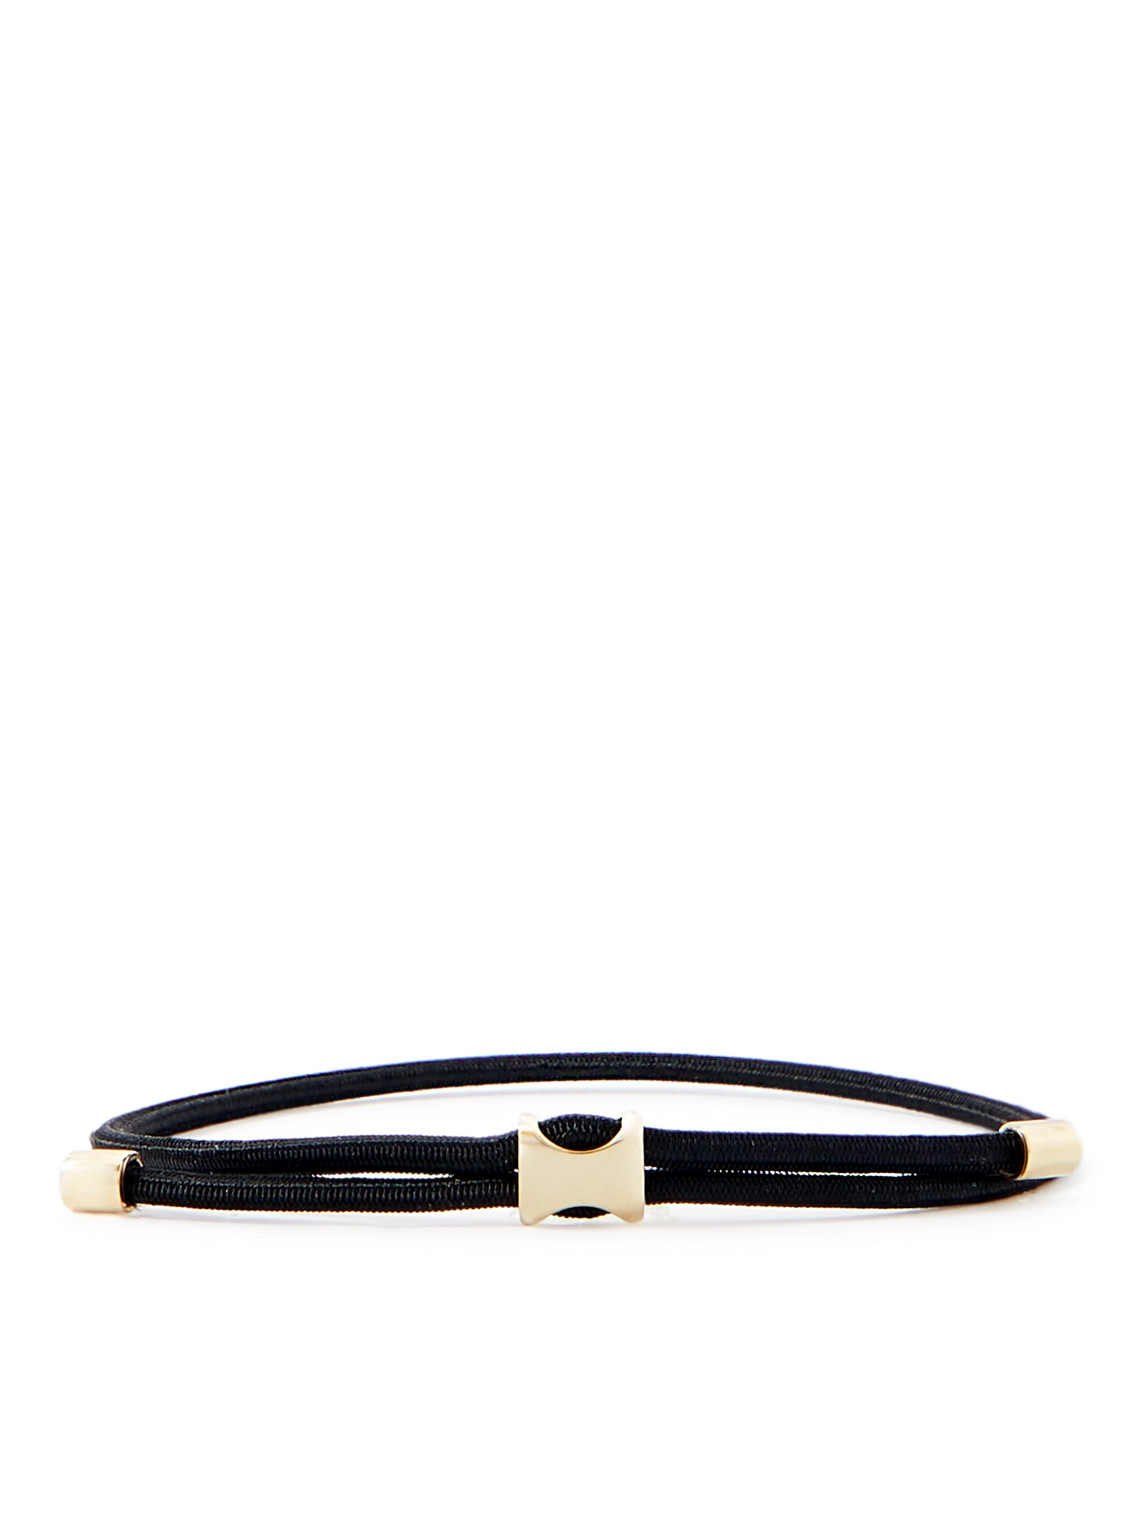 Orson Pull Cord and Gold Bracelet